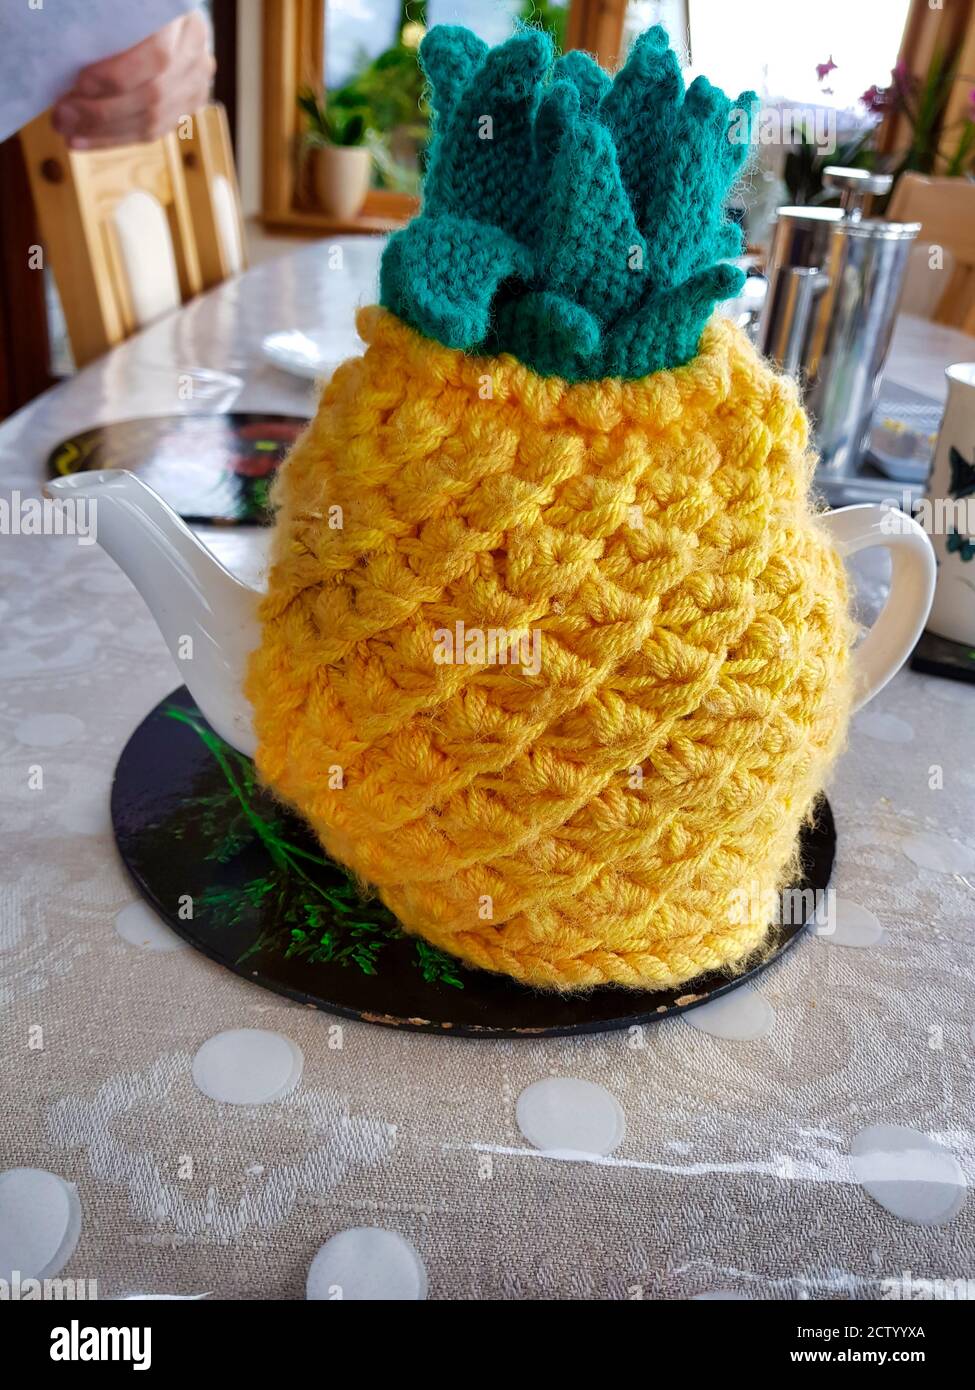 knitted pineapple is used as a tea warmer for a teapot Stock Photo